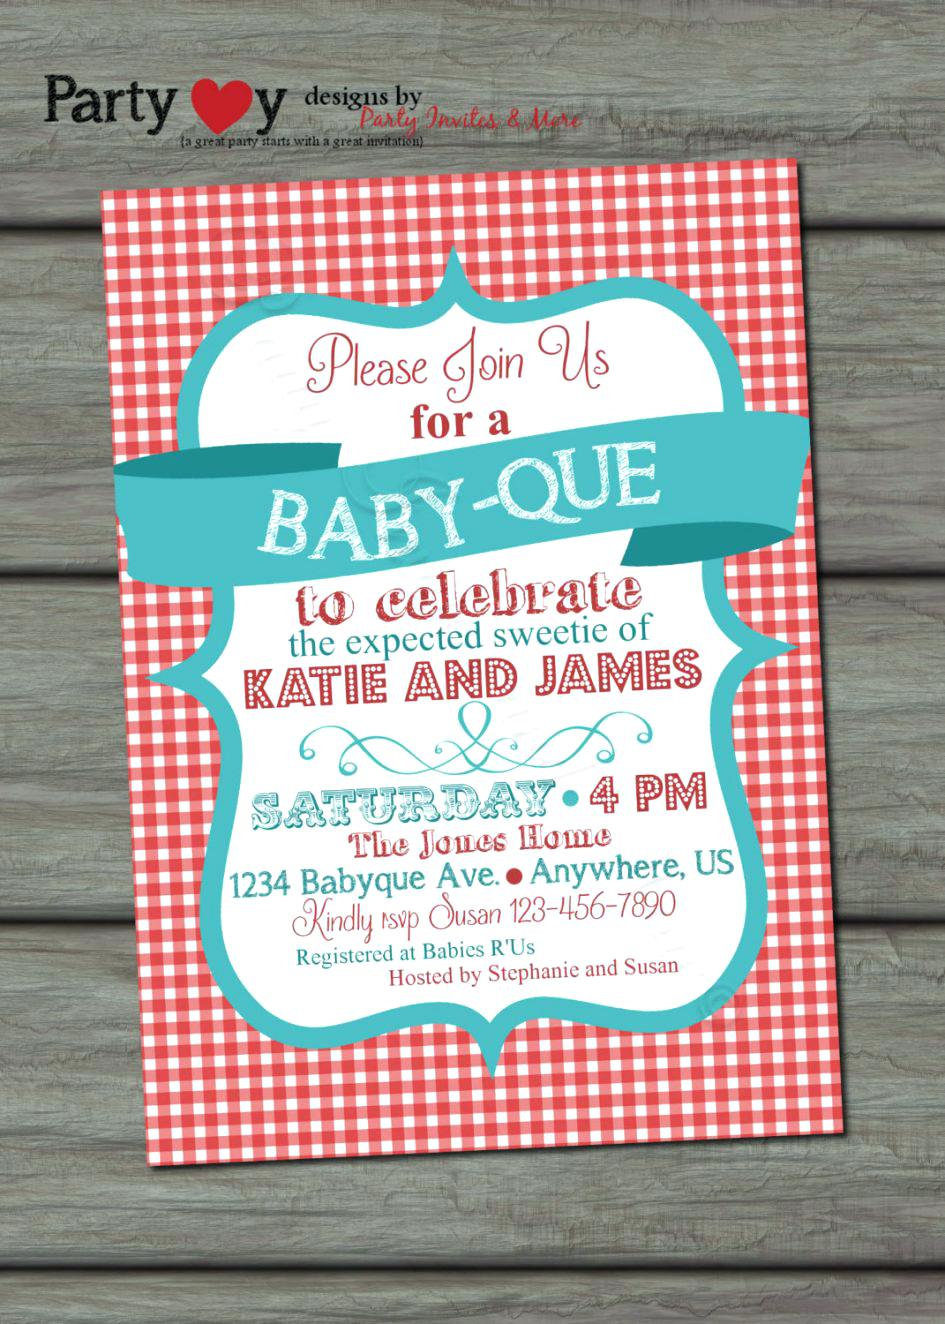 Full Size of Baby Shower:precious Coed Baby Shower Picture Designs Coed Baby Shower Ideas For Coed Baby Shower Baby Invitations Coed Baby Shower Themes Ideas For Coed Baby Shower Baby Invitations Coed Baby Shower Themes Boy Decor Large Size